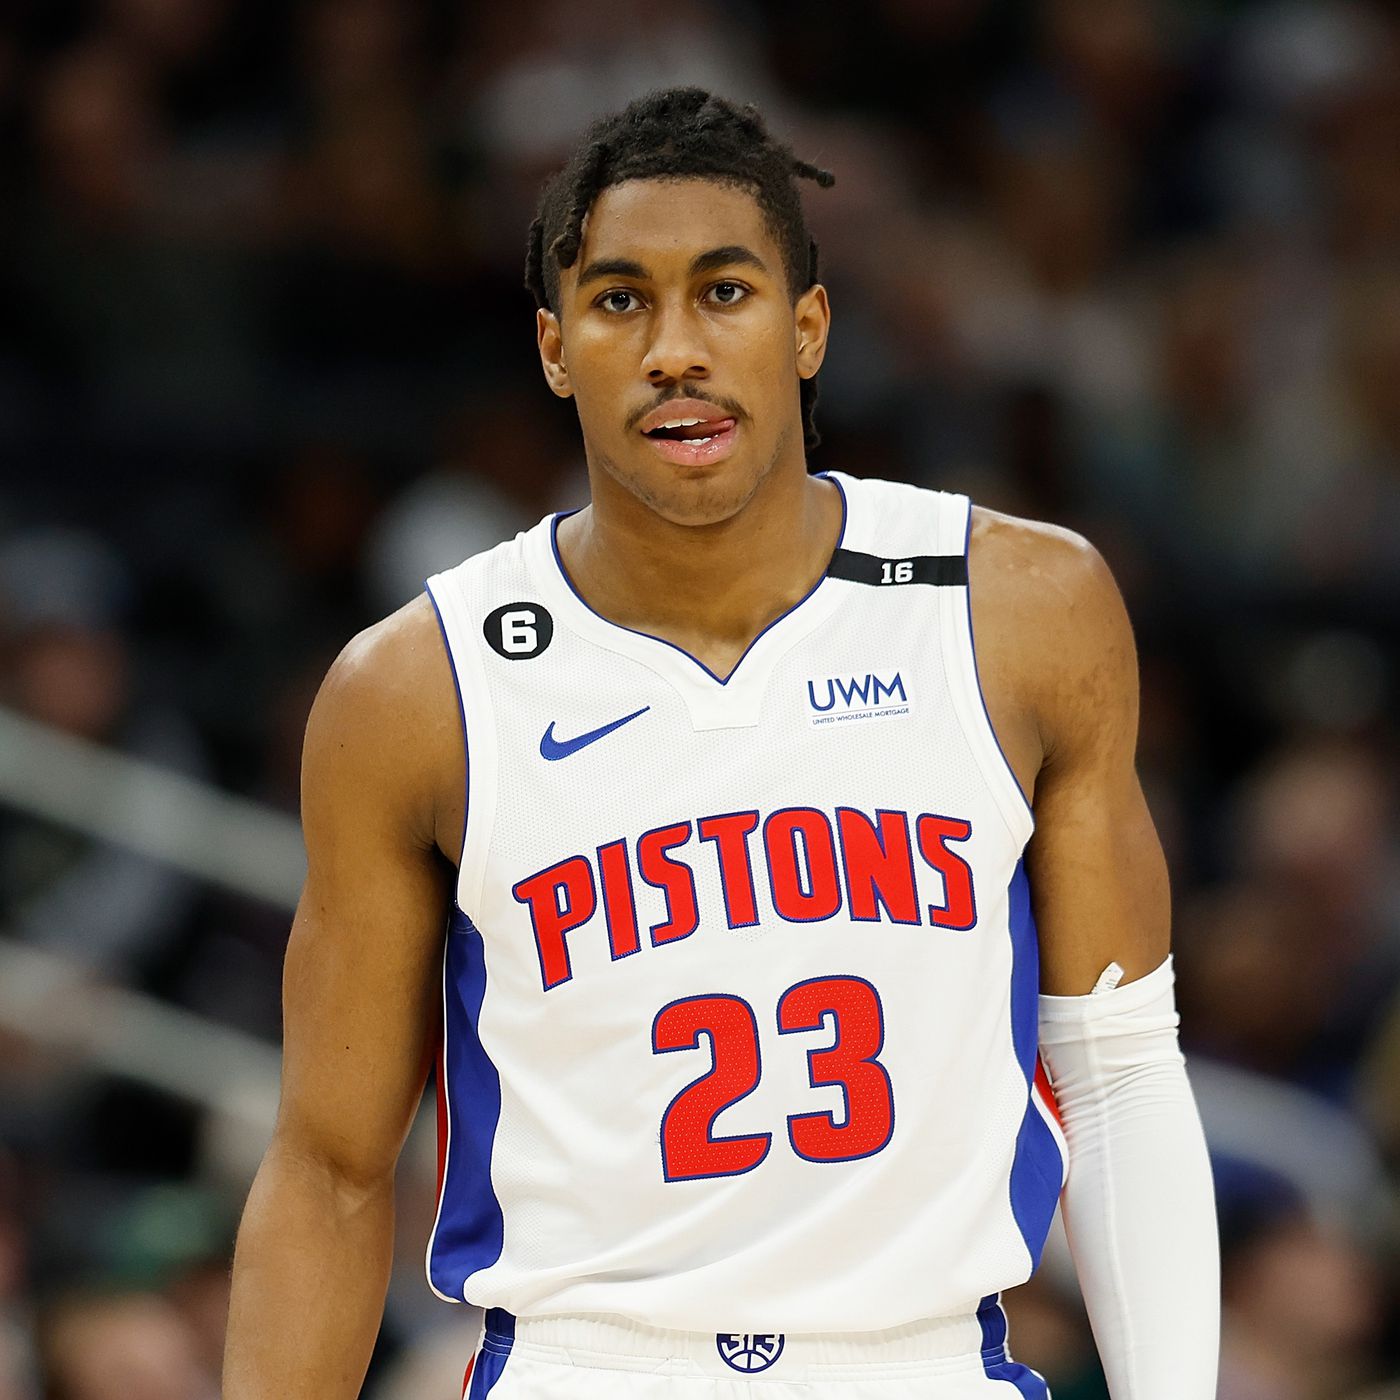 Jaden Ivey, Brooklyn Nets Rumors: Coach Disputes Might Make Jaden Ivey Force His Way Out Of Detroit Pistons